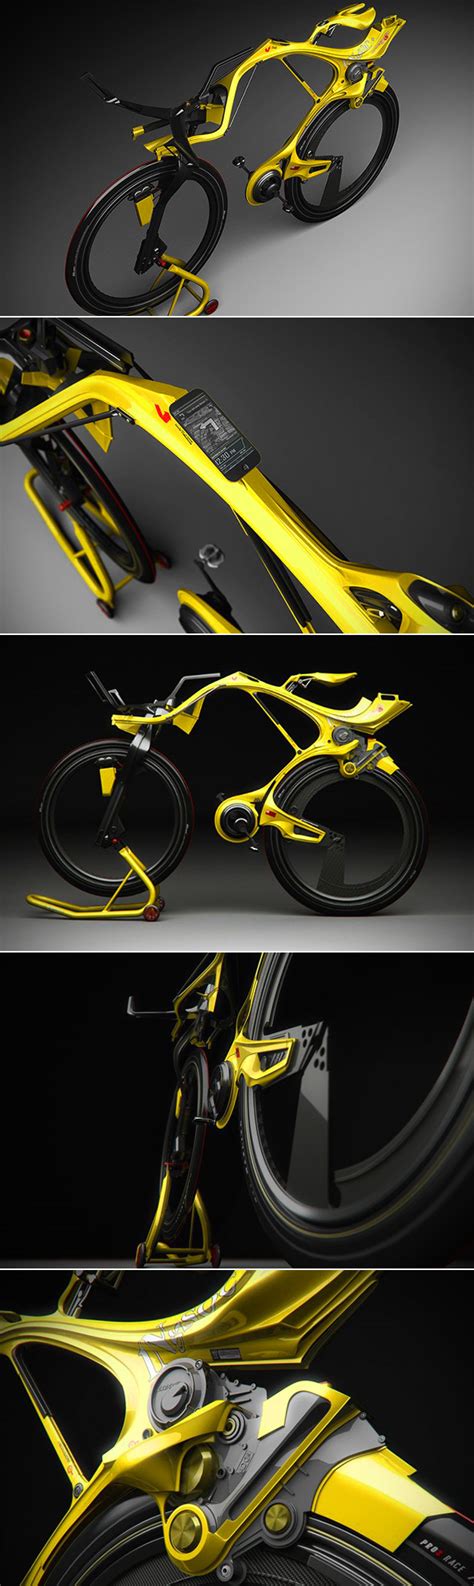 Chainless Ingsoc Hybrid Alien Bike Looks To Be From The Future Even